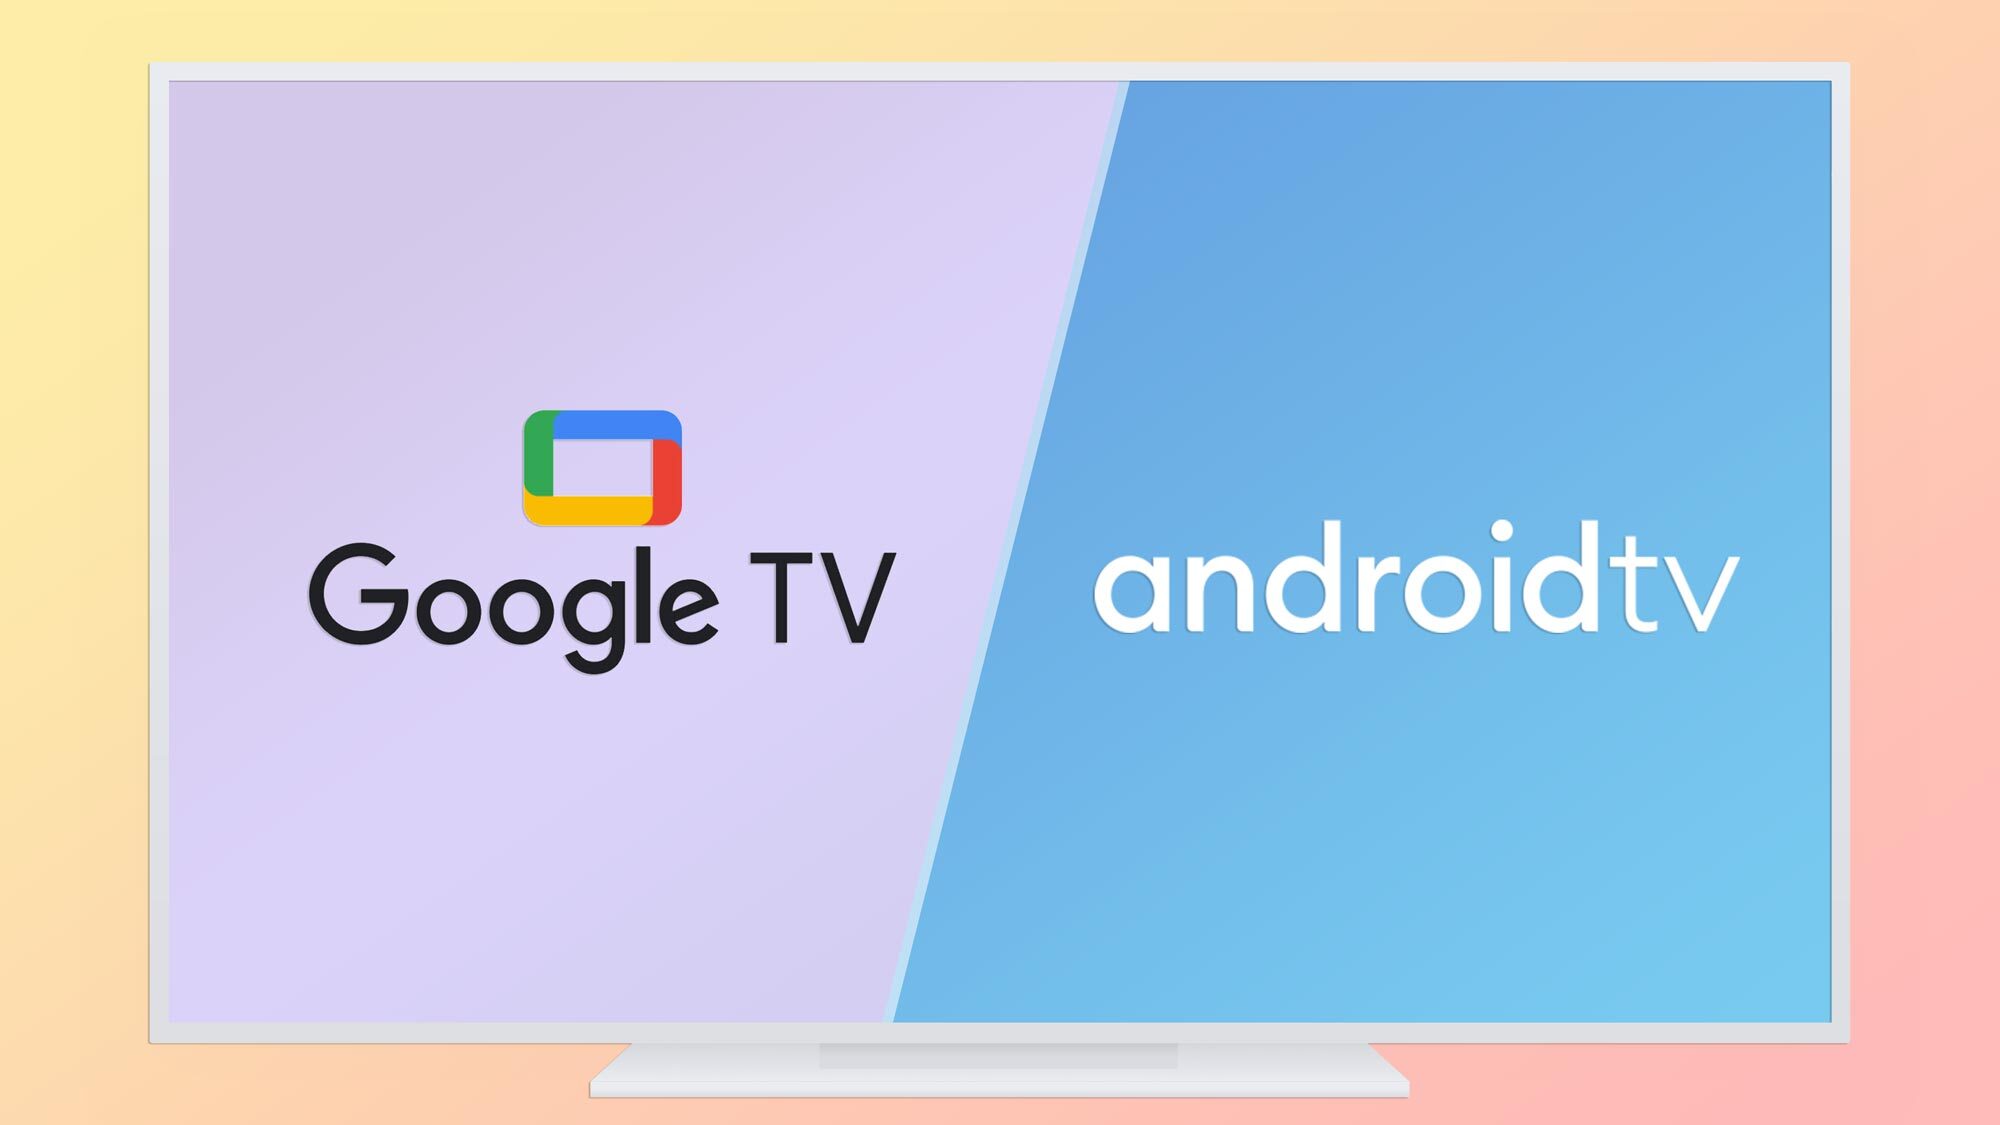 Samsung Tizen OS vs Android TV: What is the Difference?